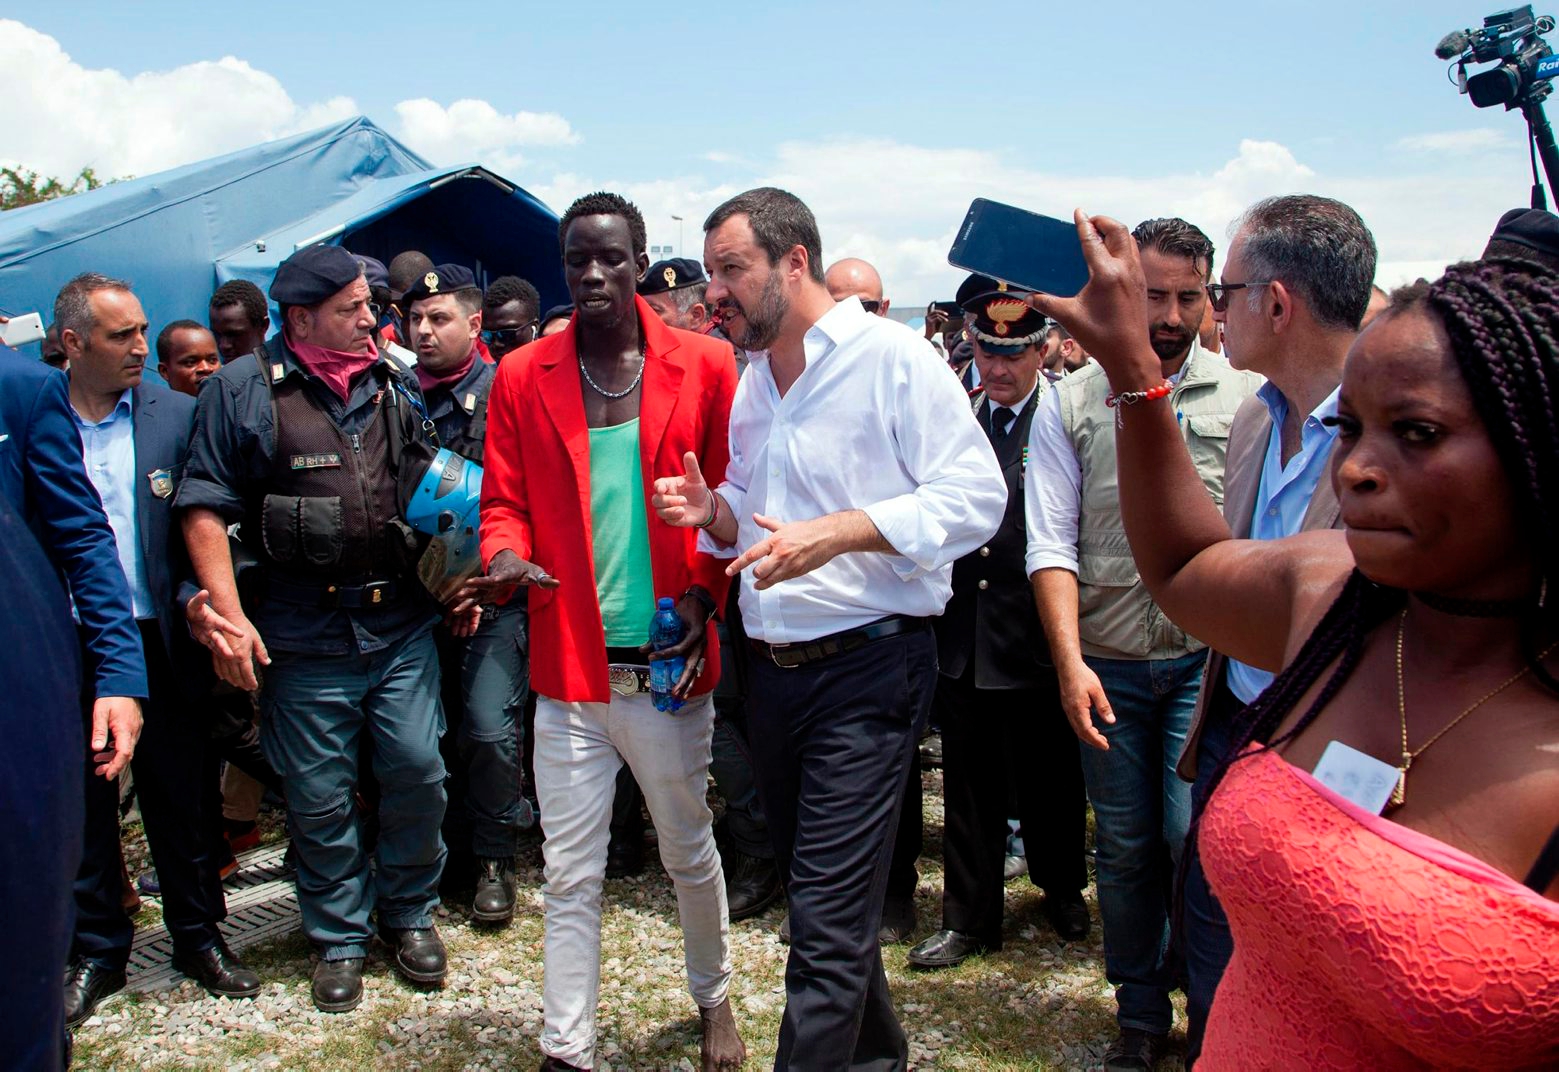 Italian interior minister Matteo Salvini, center, white shirt, pays a visit to the San Ferdinando slum, near Reggio Calabria, Southern Italy, Tuesday, July 10, 2018. Italy's hard-line, anti-migrant interior minister has toured a crime-laden migrant shanty in southern Calabria and vowed to enforce only "limited, controlled and qualified" immigration. Matteo Salvini challenged the "do-gooders" who want to open Italy's ports to migrants to visit the San Ferdinando slum in Reggio Calabria, where he heard of shameless farmers exploiting migrant workers and women being forced into prostitution to get by. Last month, a migrant was killed in San Ferdinando by his former boss. (Marco Costantino/ANSA via AP) ITALY EUROPE MIGRANTS